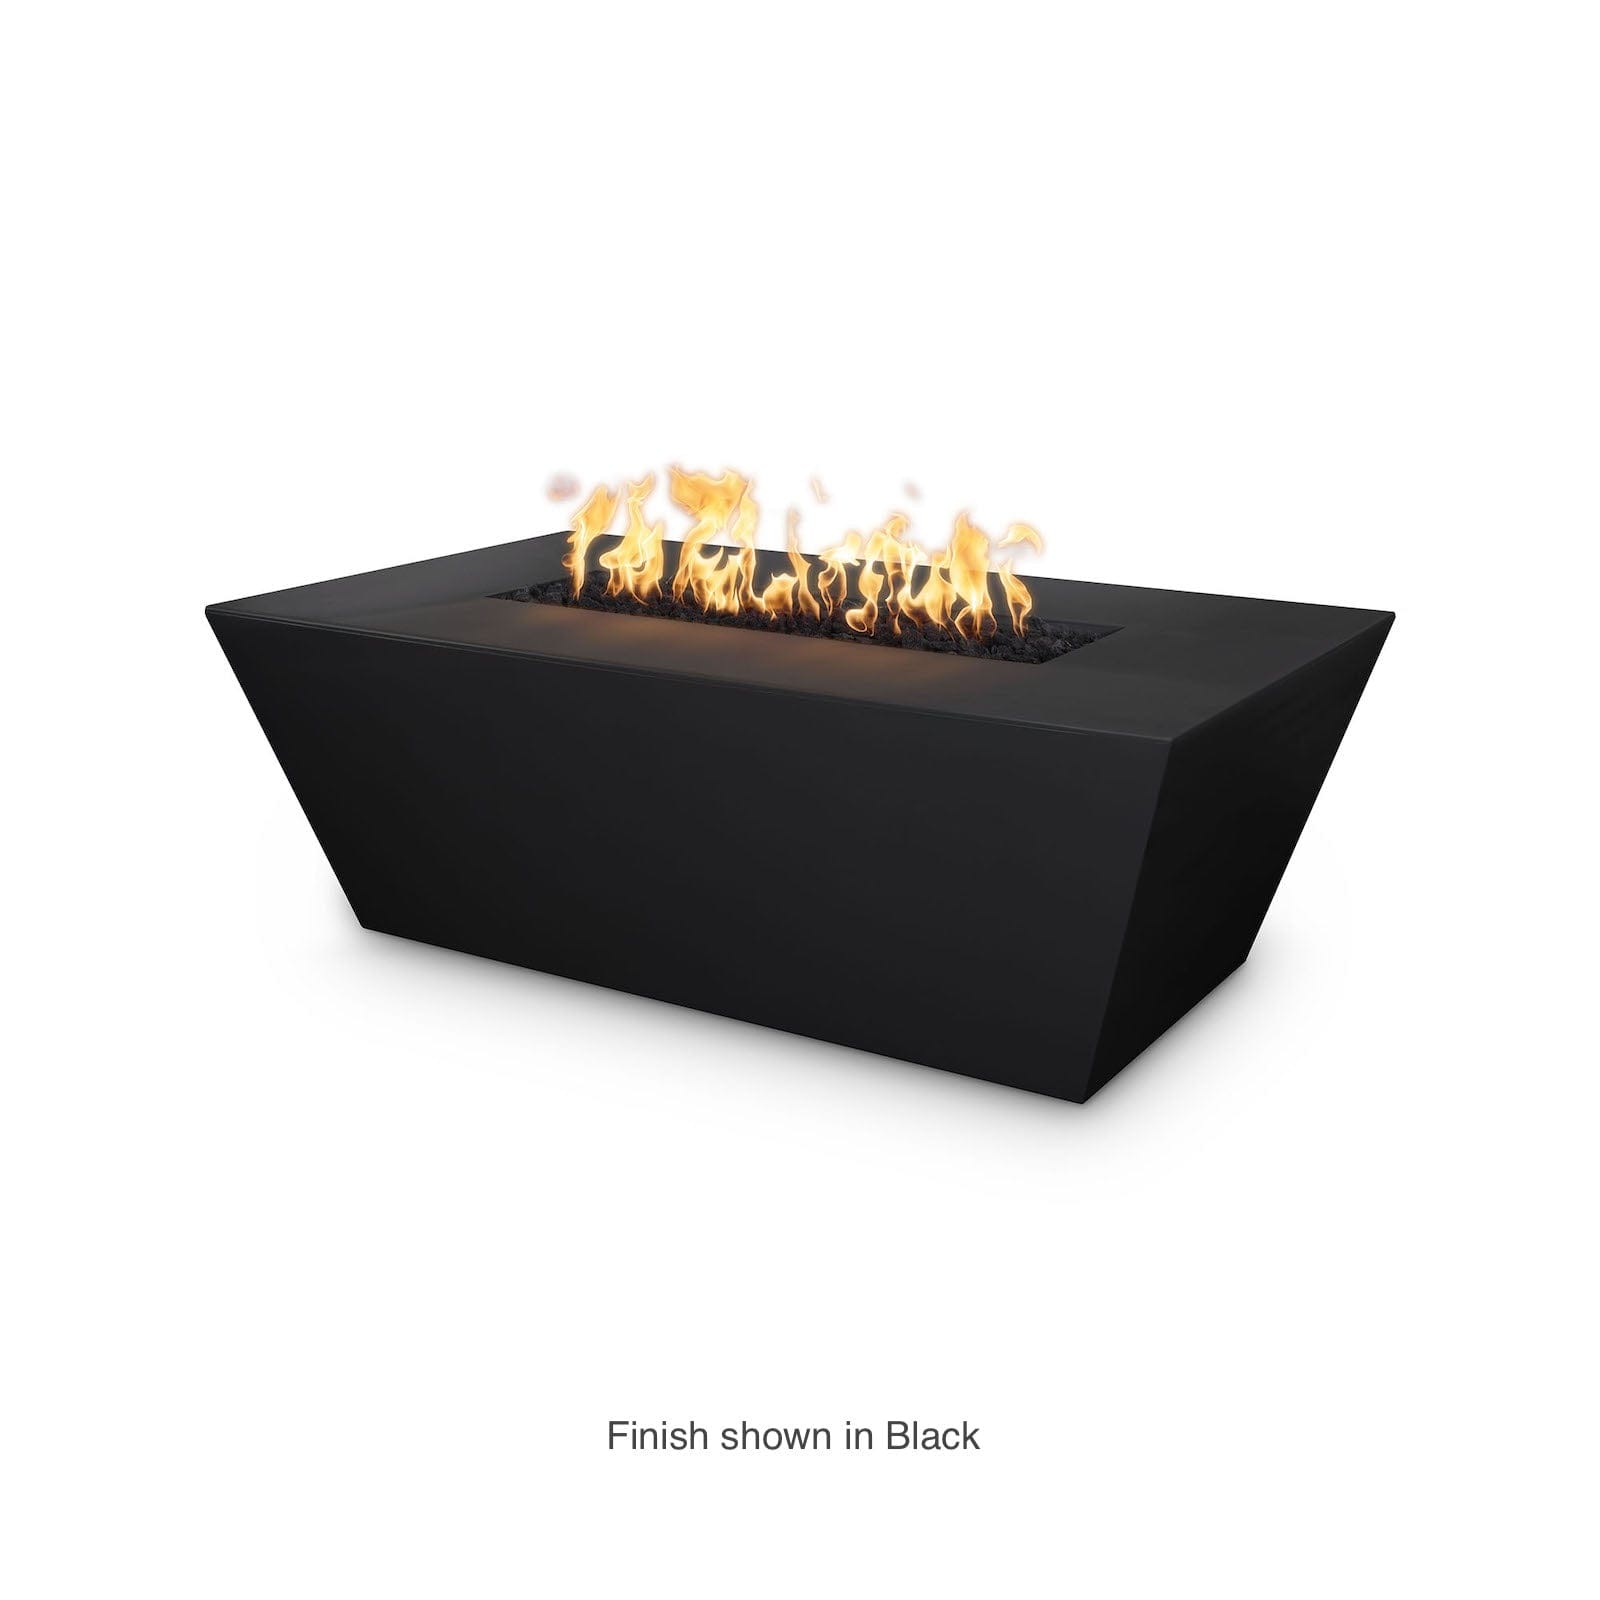 The Outdoor Plus Fire Features The Outdoor Plus 60" Rectangular Angelus Fire Pit in Metallic and Rustic Finishes - GFRC Concrete / OPT-AGLGF60, OPT-AGLGF60FSML, OPT-AGLGF60FSEN, OPT-AGLGF60E12V, OPT-AGLGF60EKIT